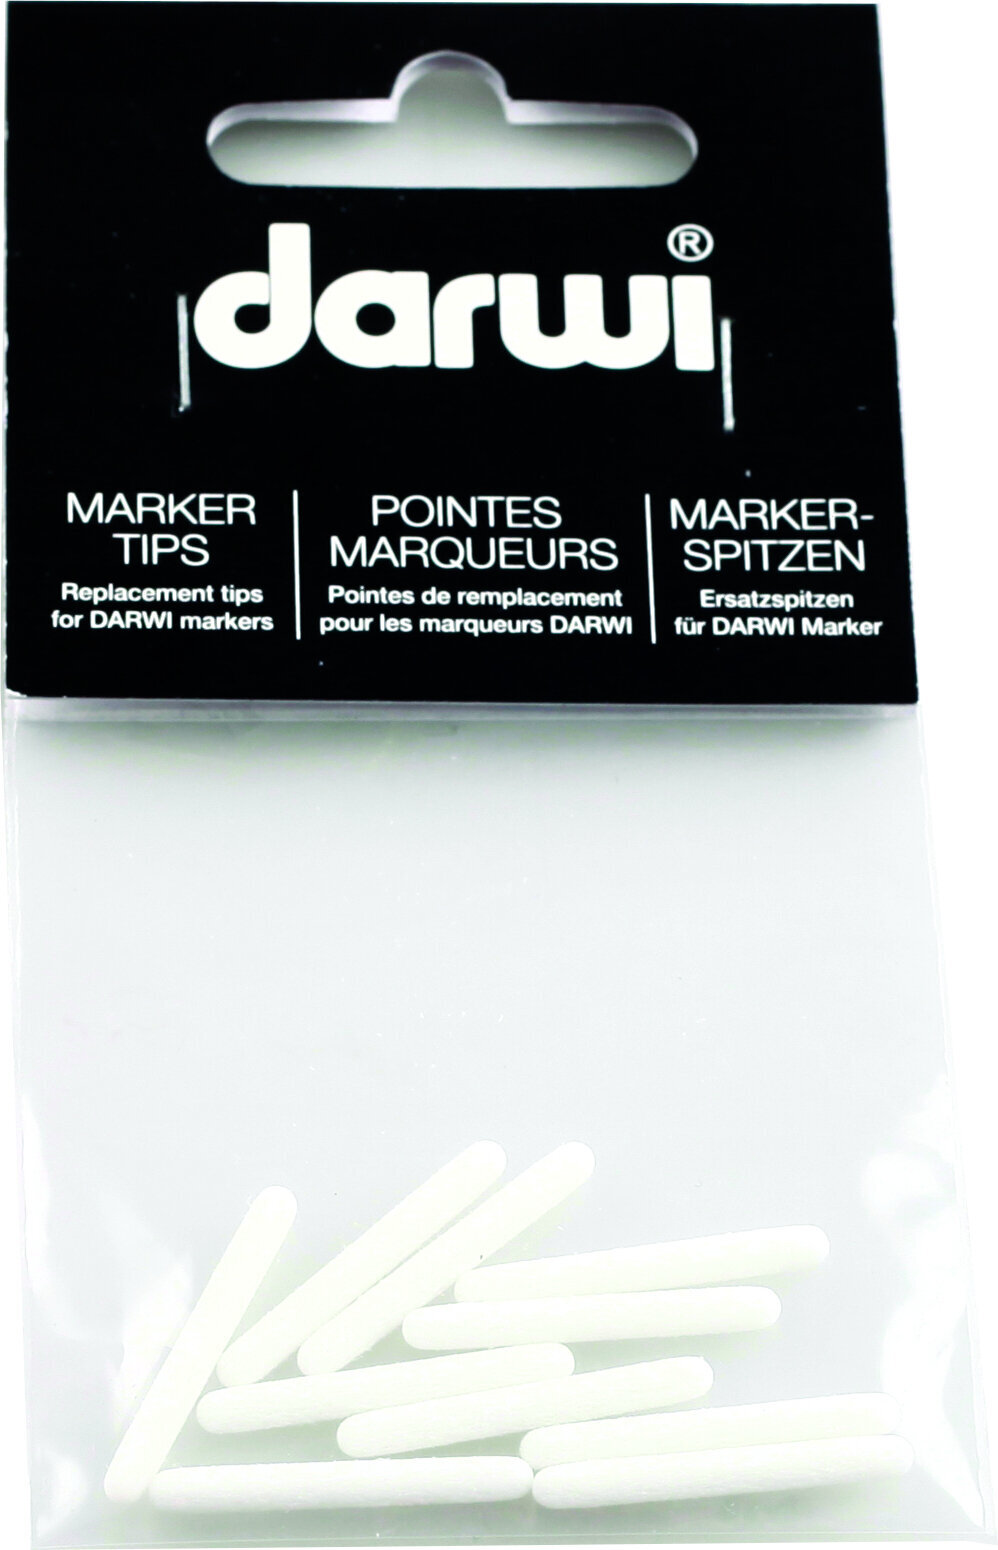 Felt-Tip Pen Darwi Replacement Tips For Cold Ceramic Paint Marker Replacement Tips White